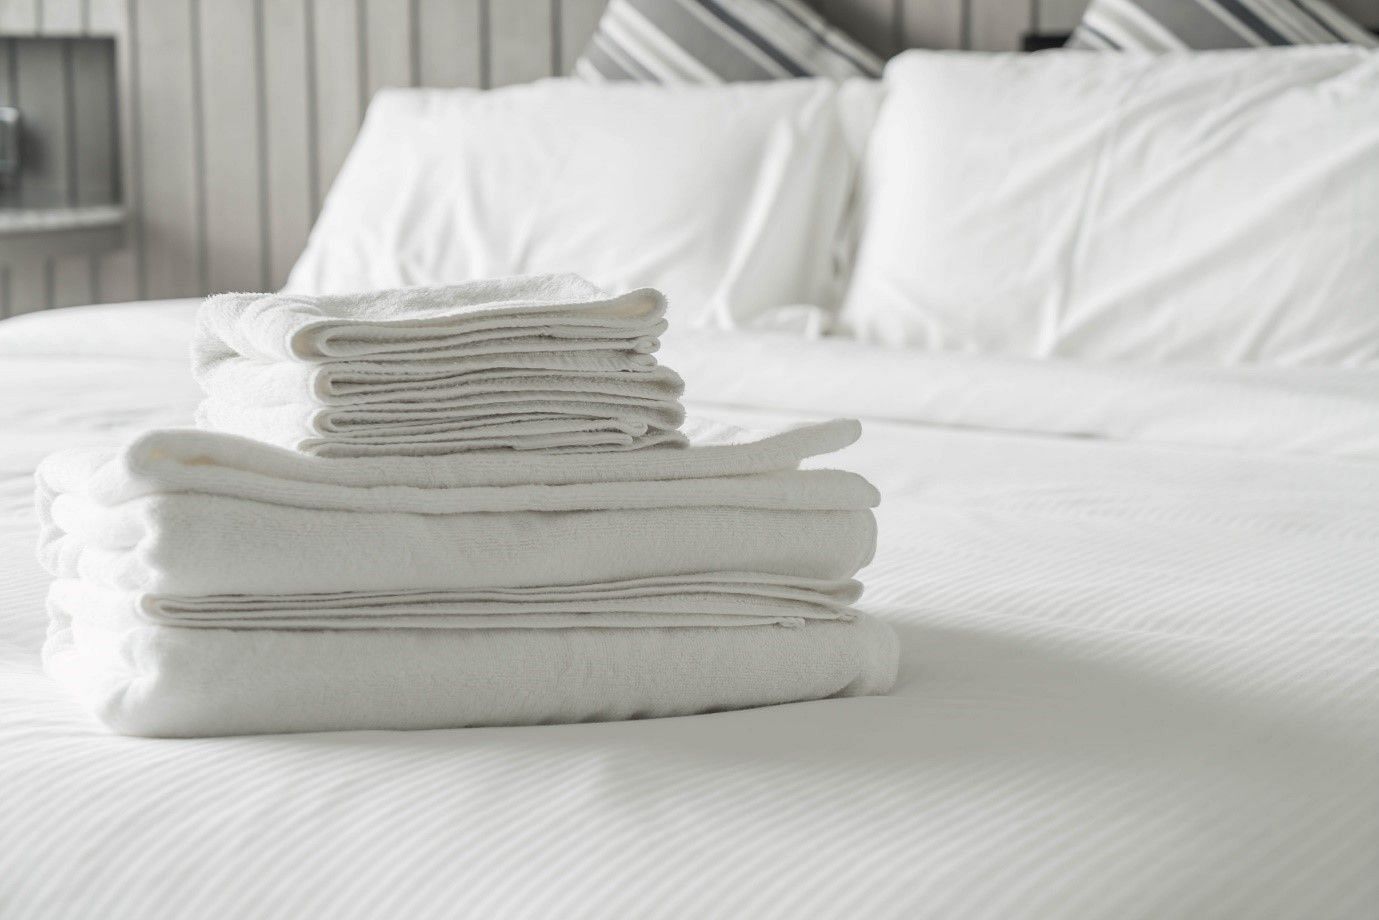 Cotton is preferred to be the best suited bedding material (Image by Topntp26 on Freepik)